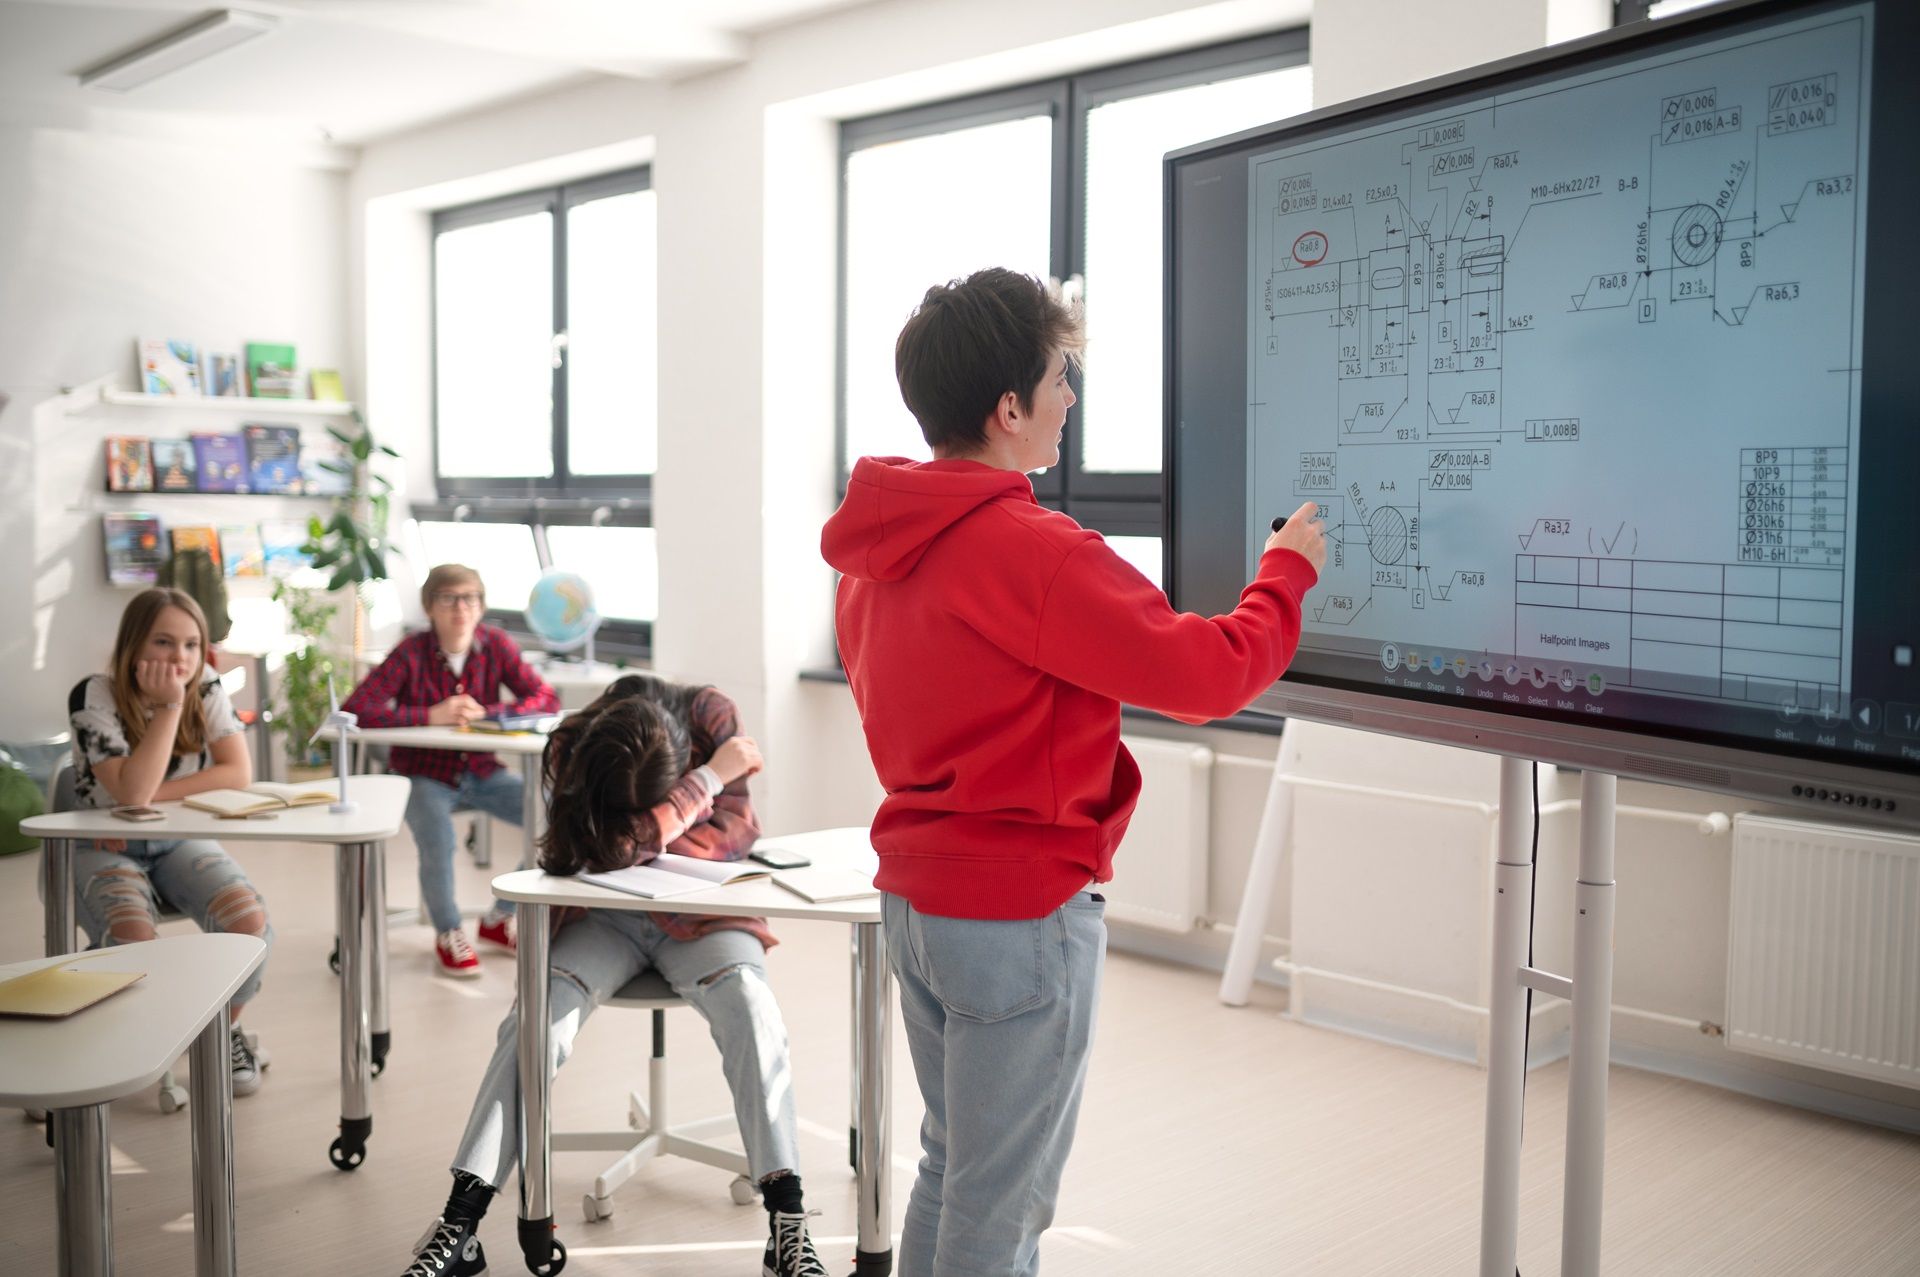 Solutions Feature: IMAGO Flash—Revolutionizing Interactive Whiteboard Experiences